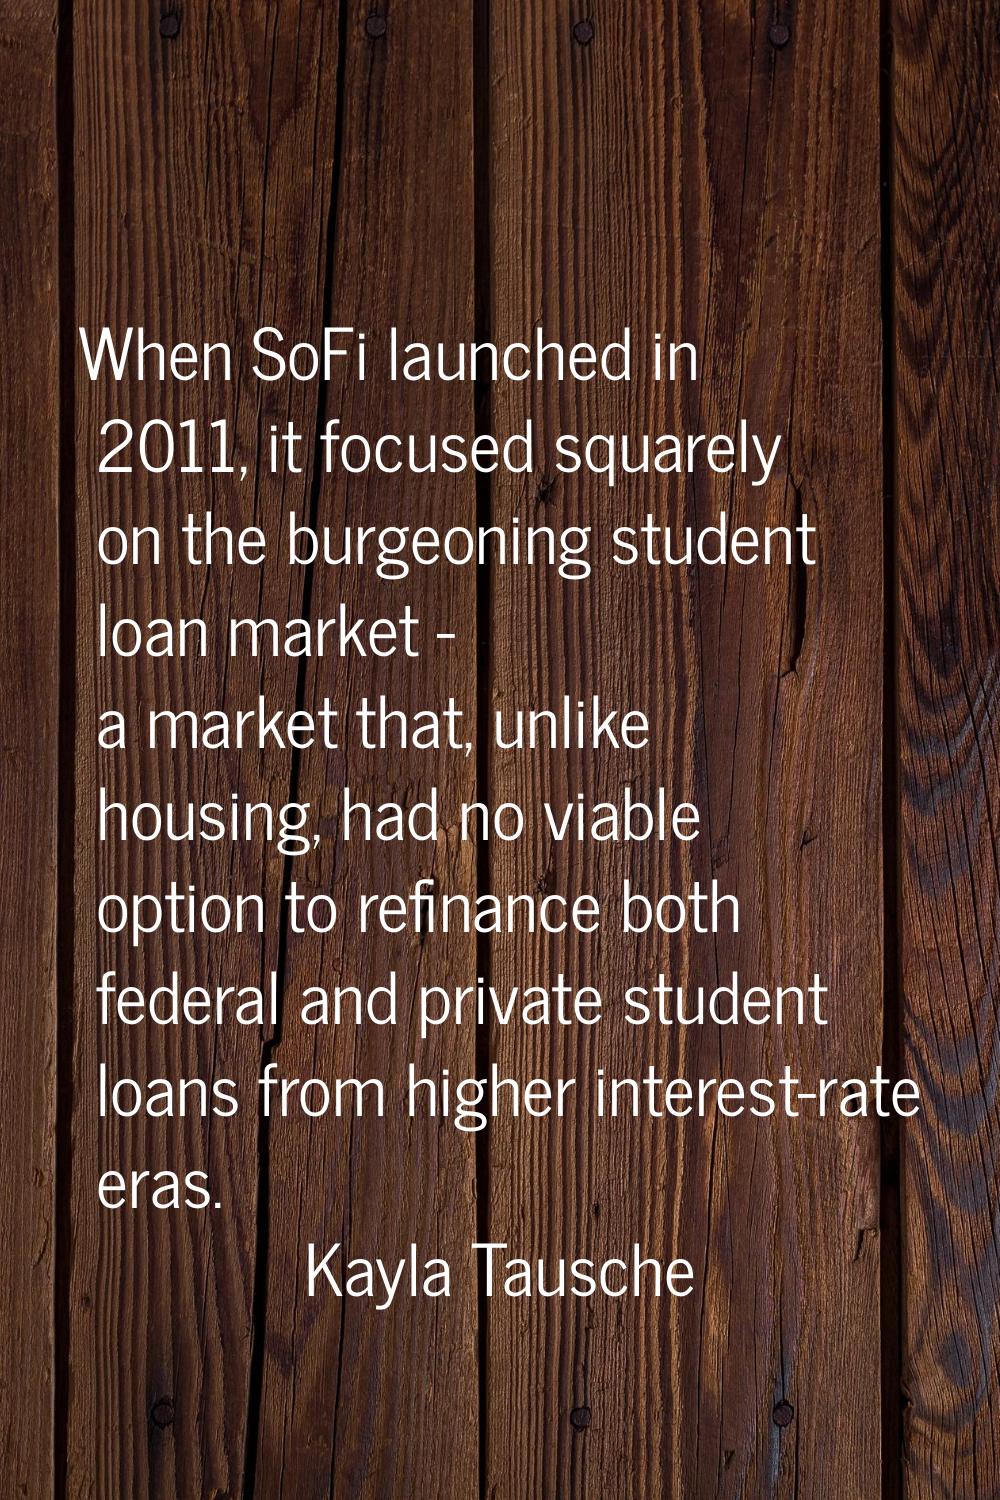 When SoFi launched in 2011, it focused squarely on the burgeoning student loan market - a market th